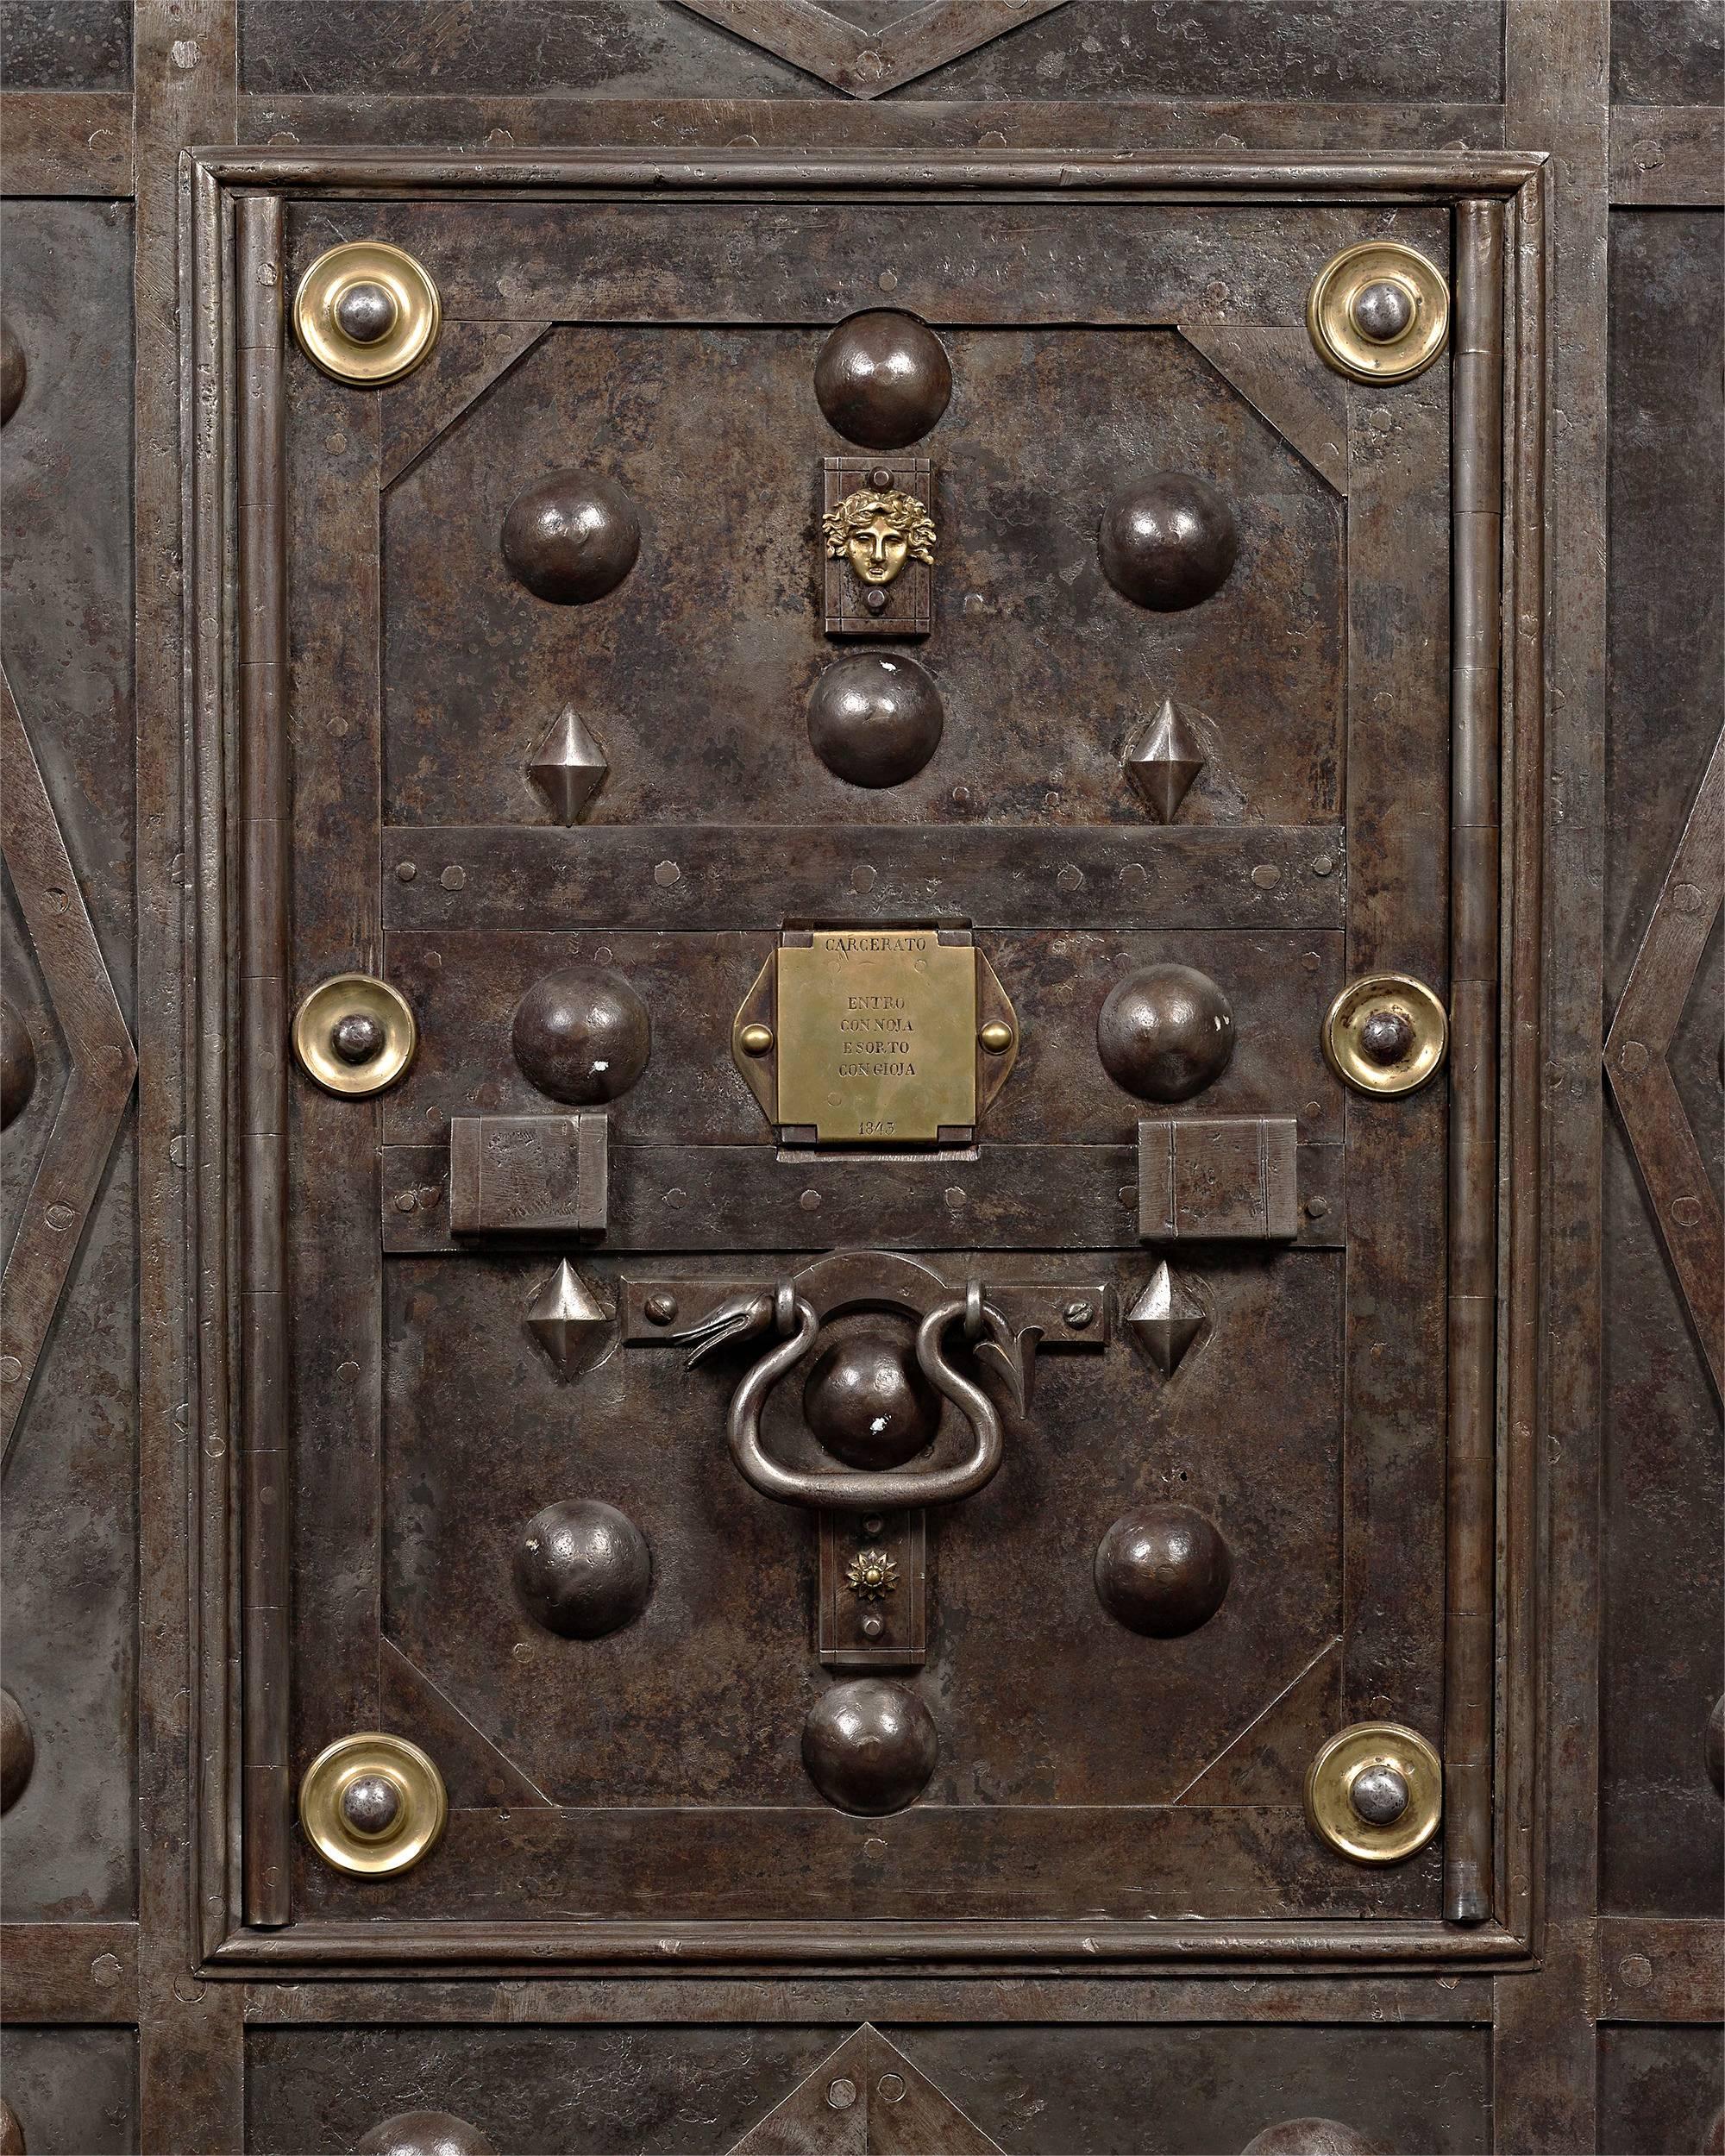 Size, security and exceptional craftsmanship distinguish this fully functioning 19th century Italian floor safe. Weighing hundreds of pounds, the fascinating safe is enveloped with thick iron plates and features one of the most intricate locking